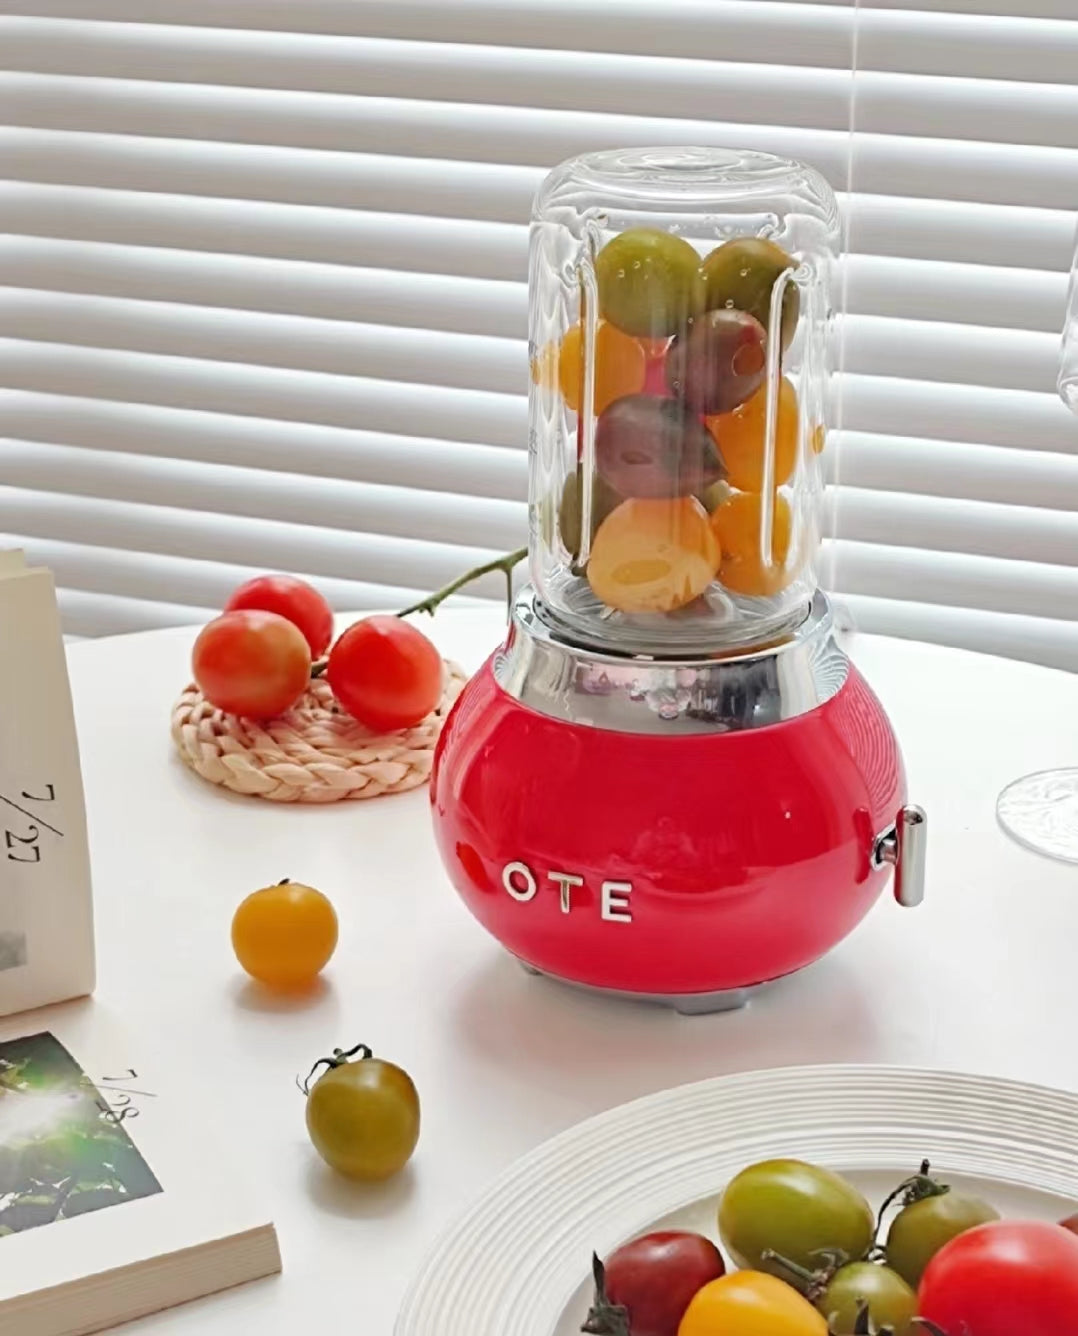 Best smoothie makers 2024: mini mixers for your fruit hit